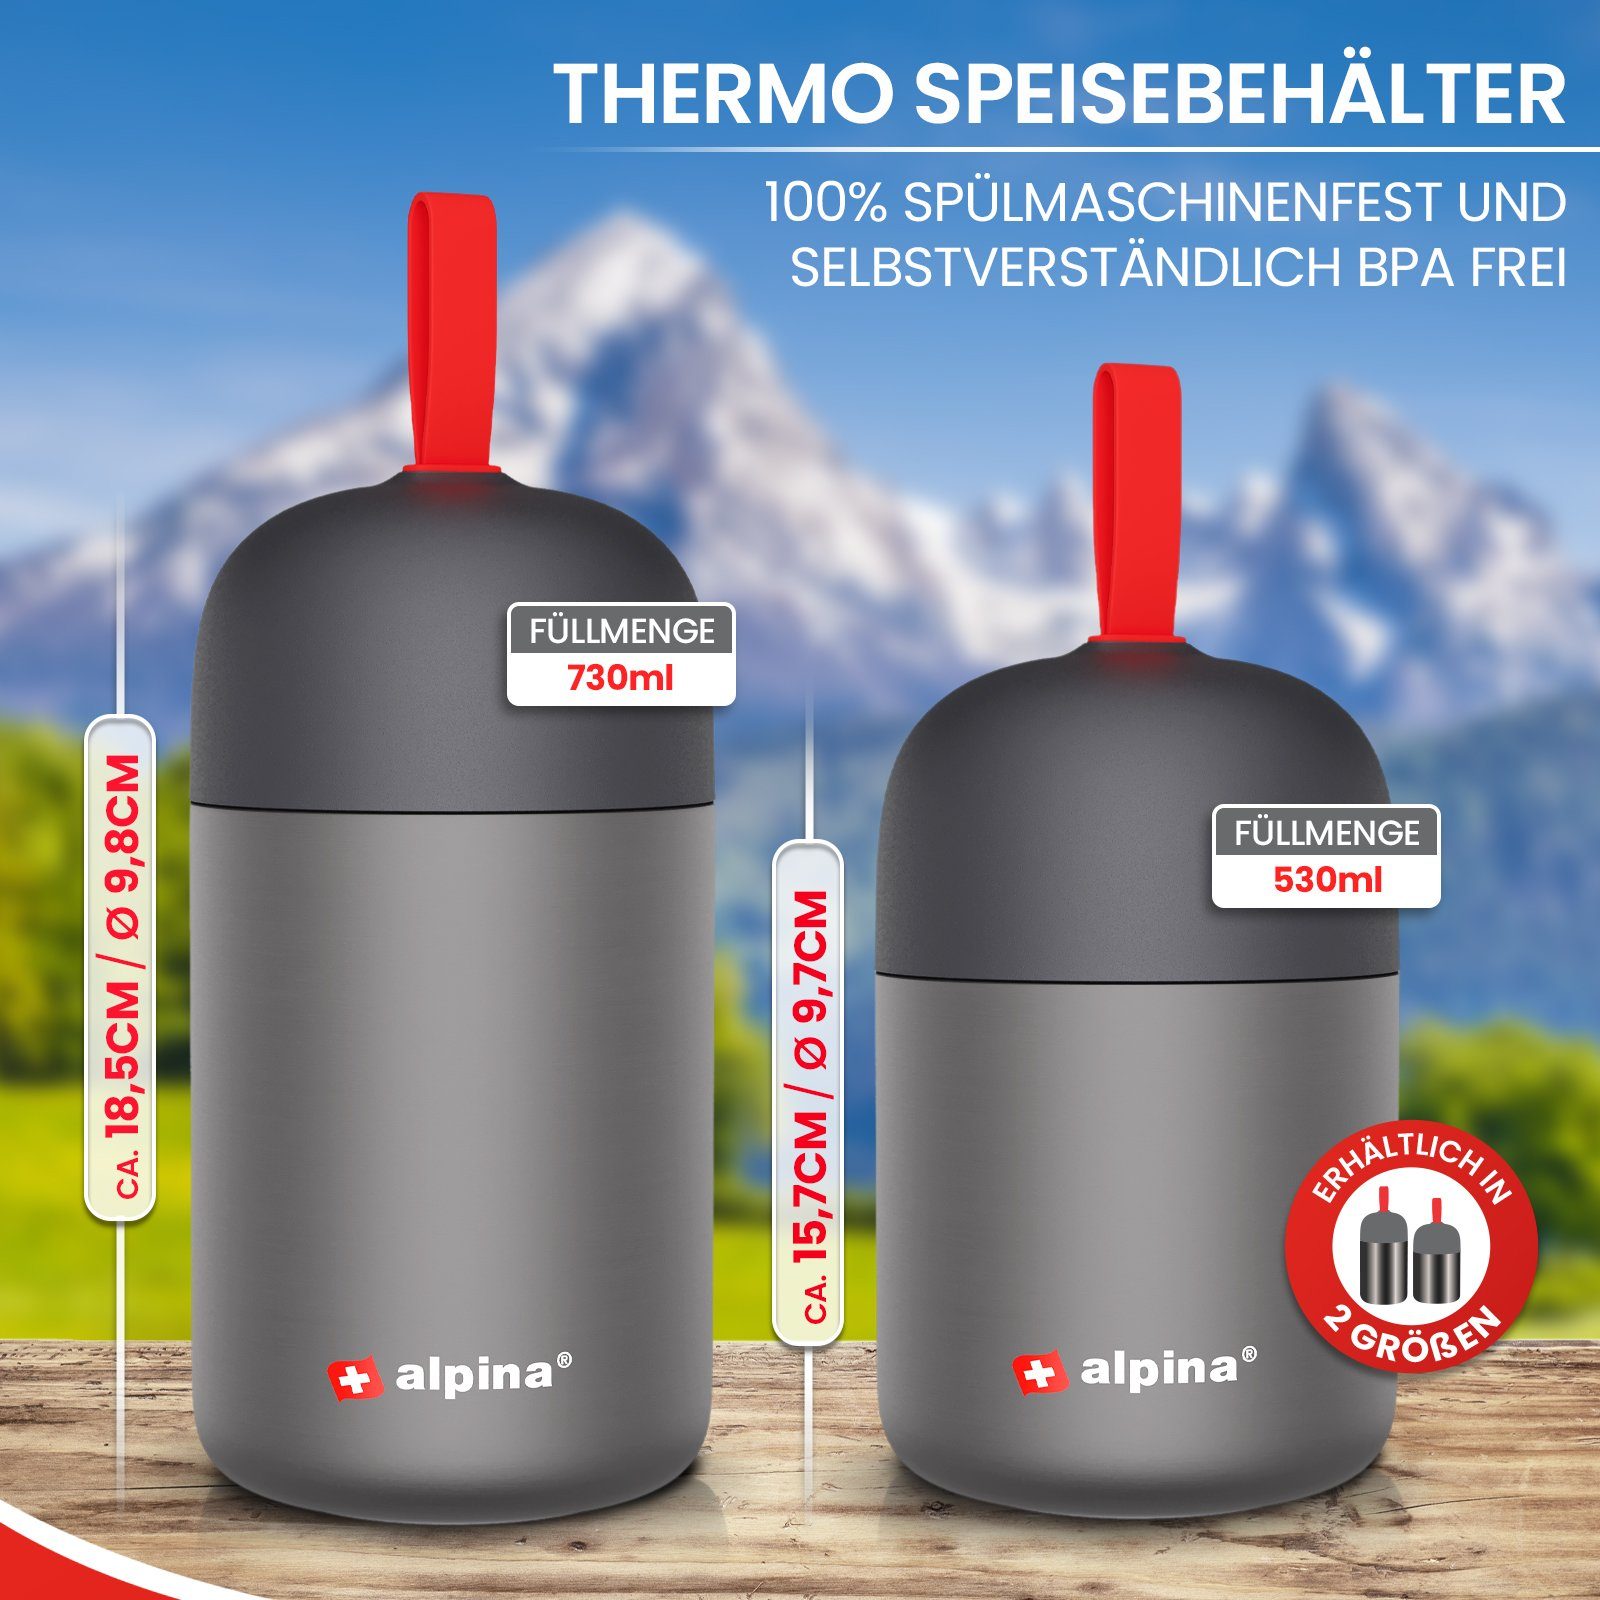 Alpina Becher Thermobehälter Thermobecher Thermo